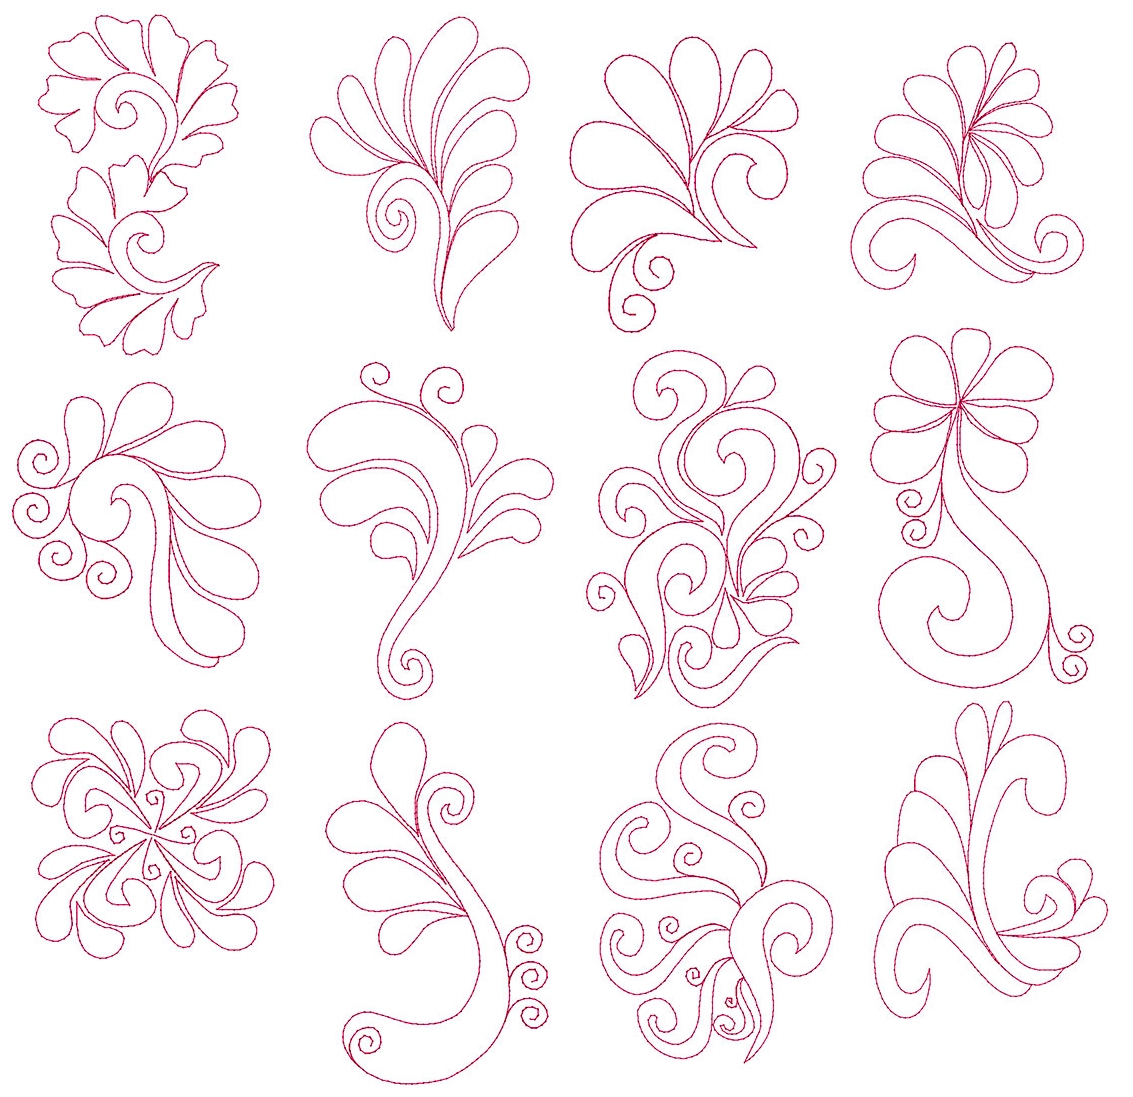 Festive Flourish Mylar Embroidery Designs by Purely Gates Embroidery